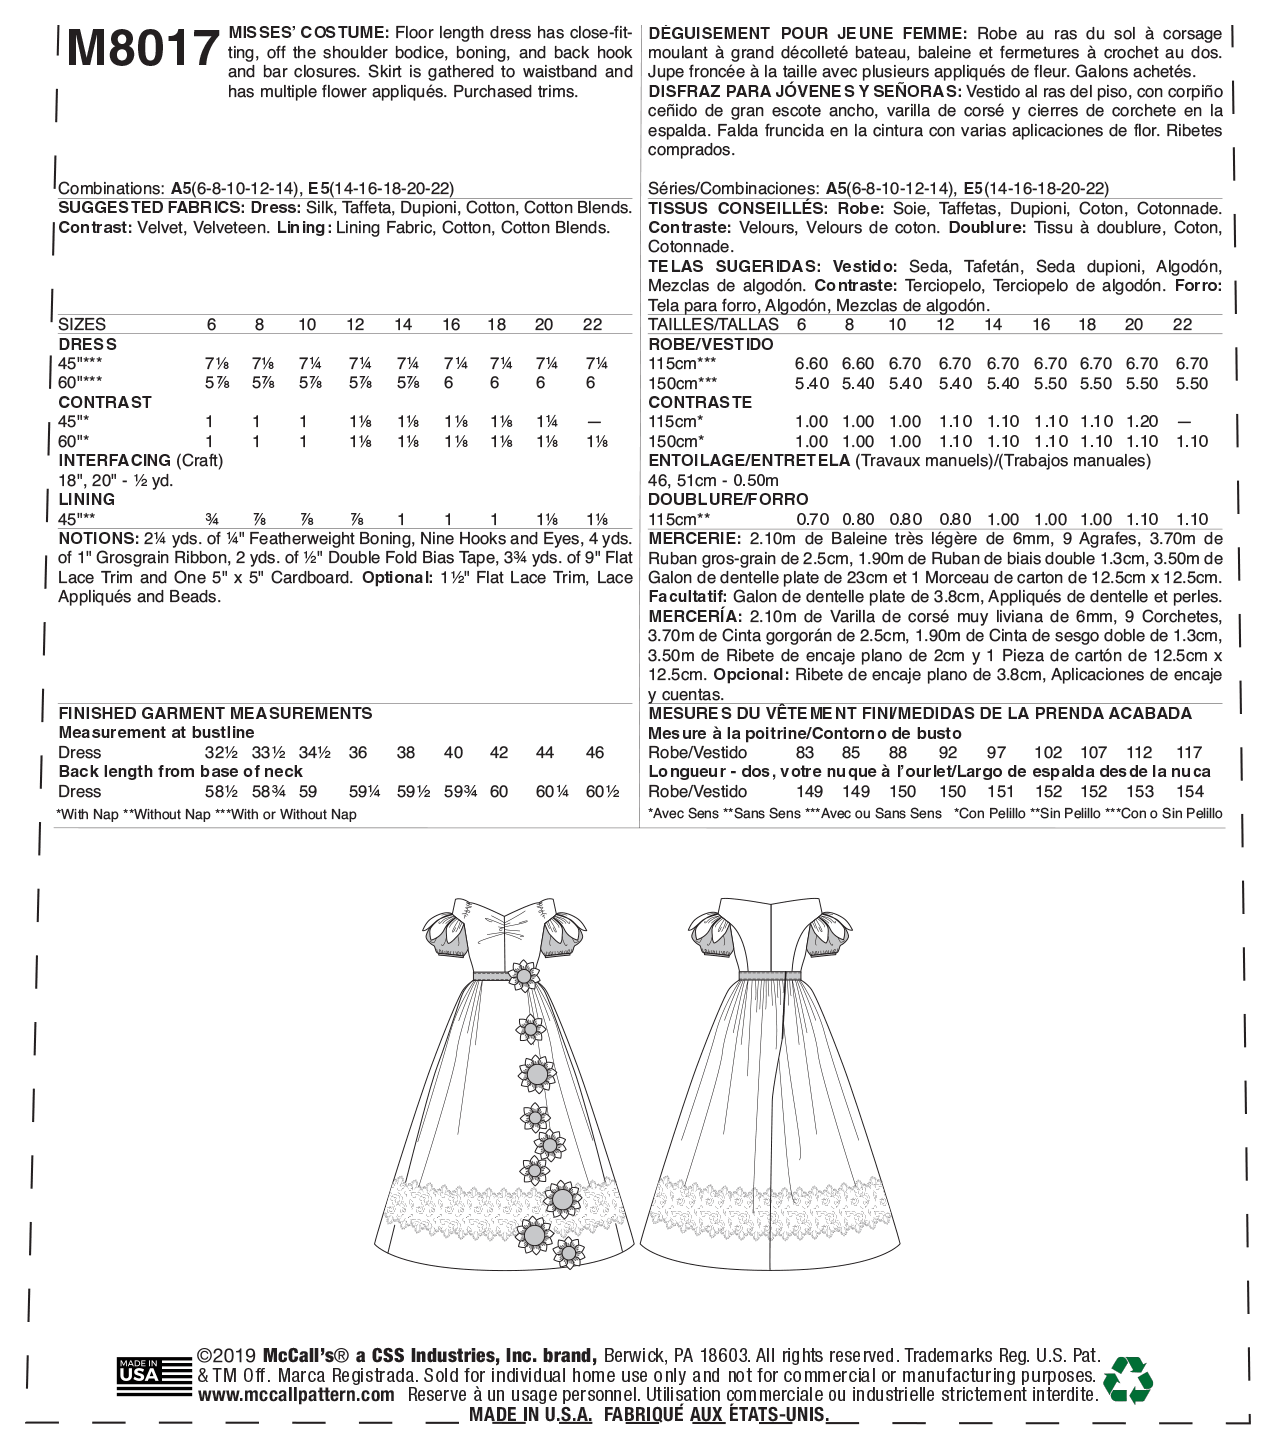 McCall's Sewing Pattern M8017 Misses' Costume